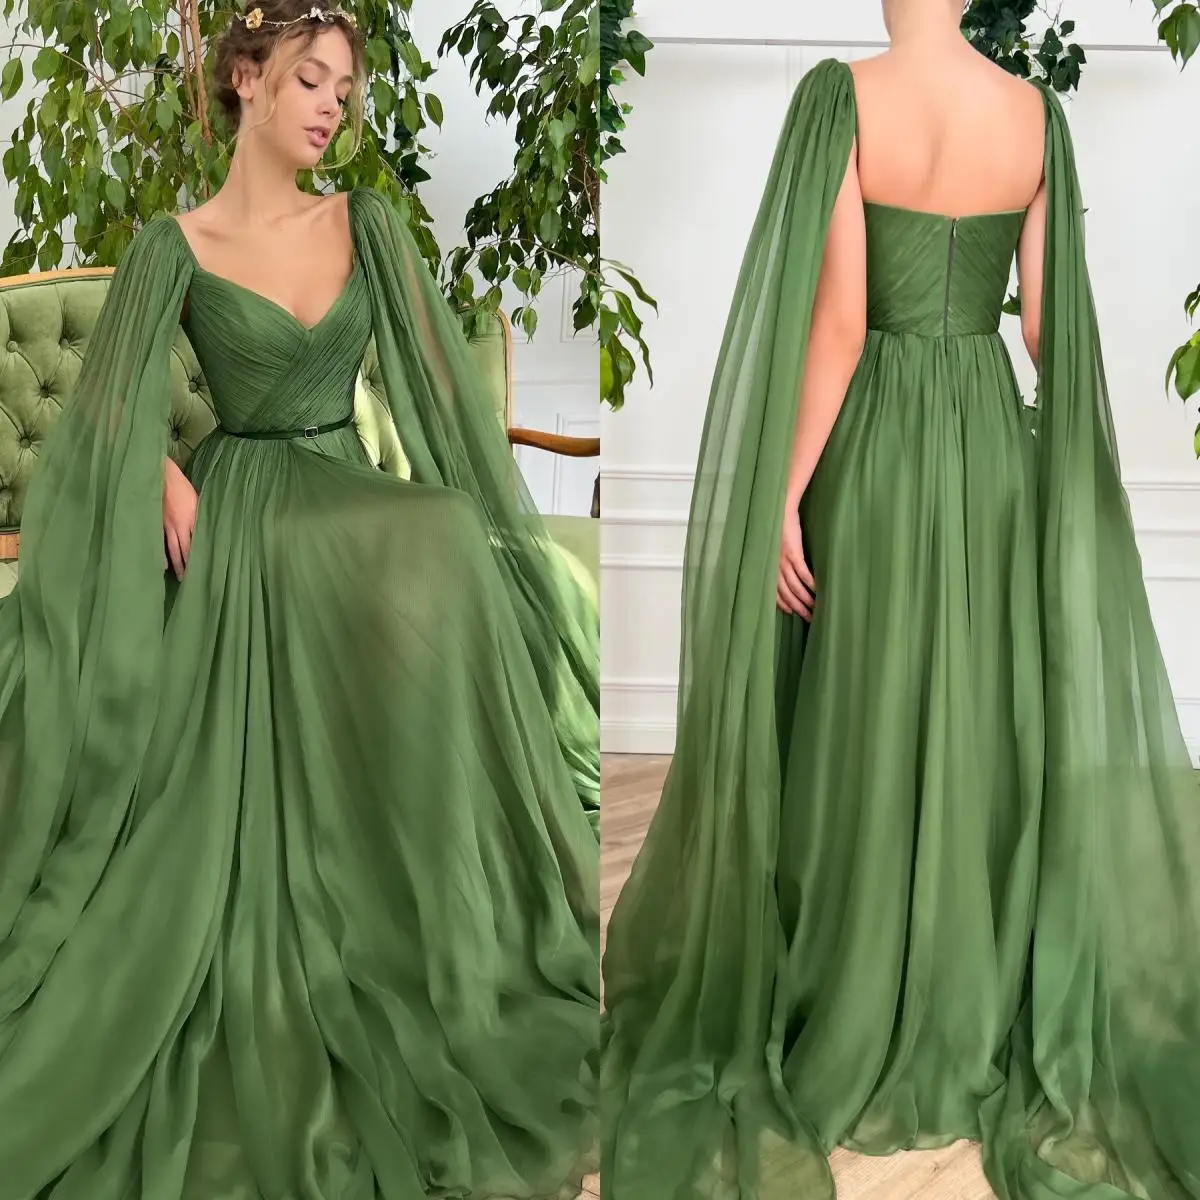 

14889#Fairy Green A-line Prom Dress With Shawl 100D Chiffon Party Dress With Belt Sweep Train Evening Dresses Vestidos De Noche